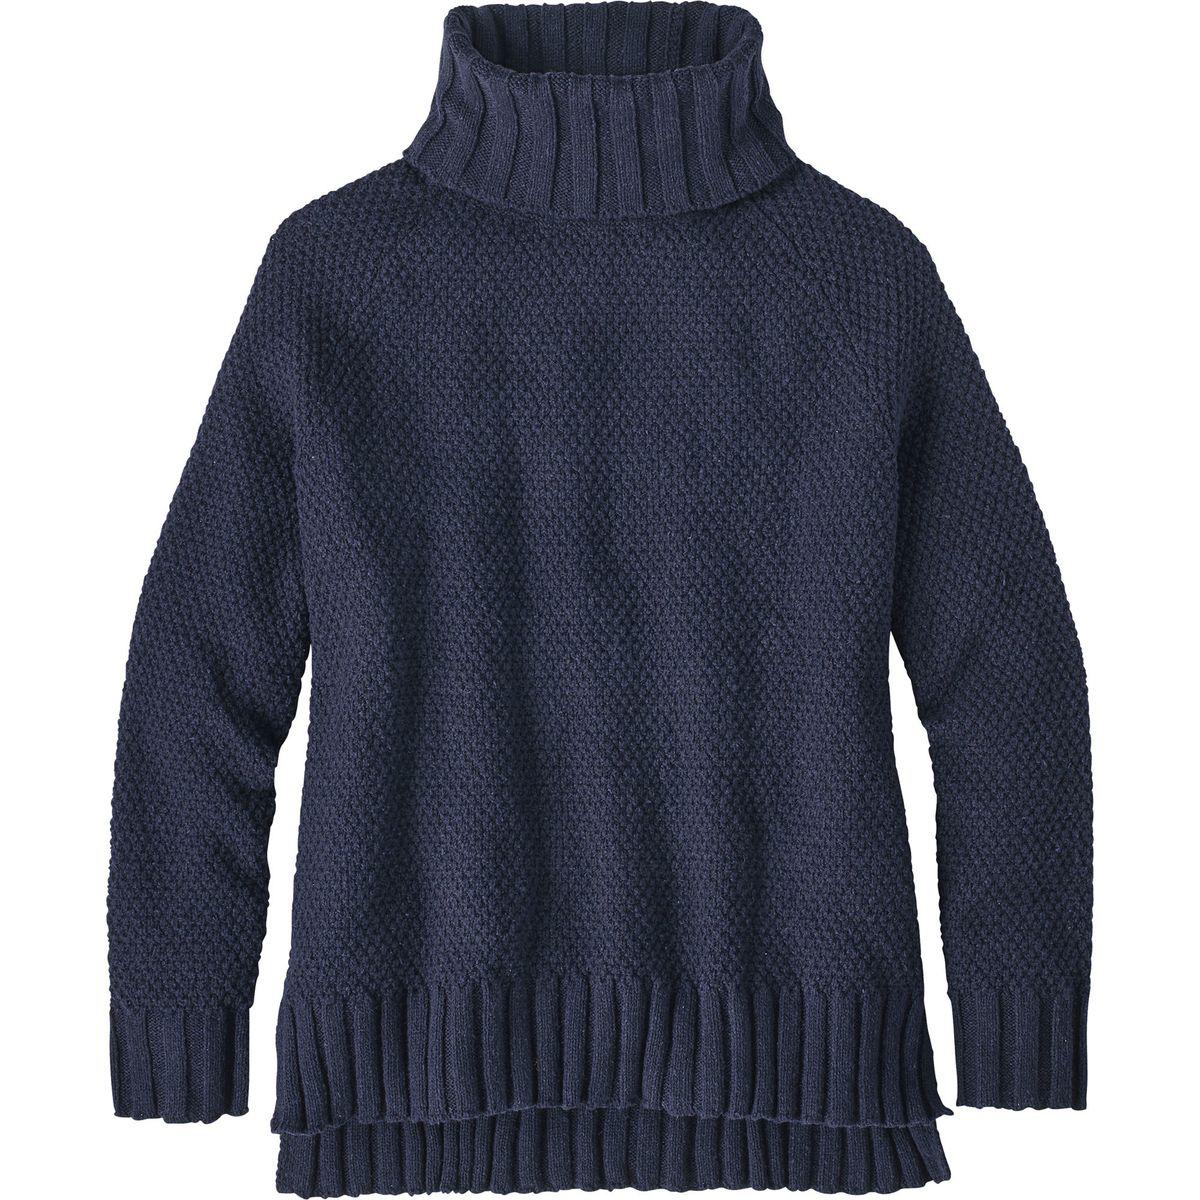 Lyst - Patagonia Off Country Turtleneck Sweater in Blue